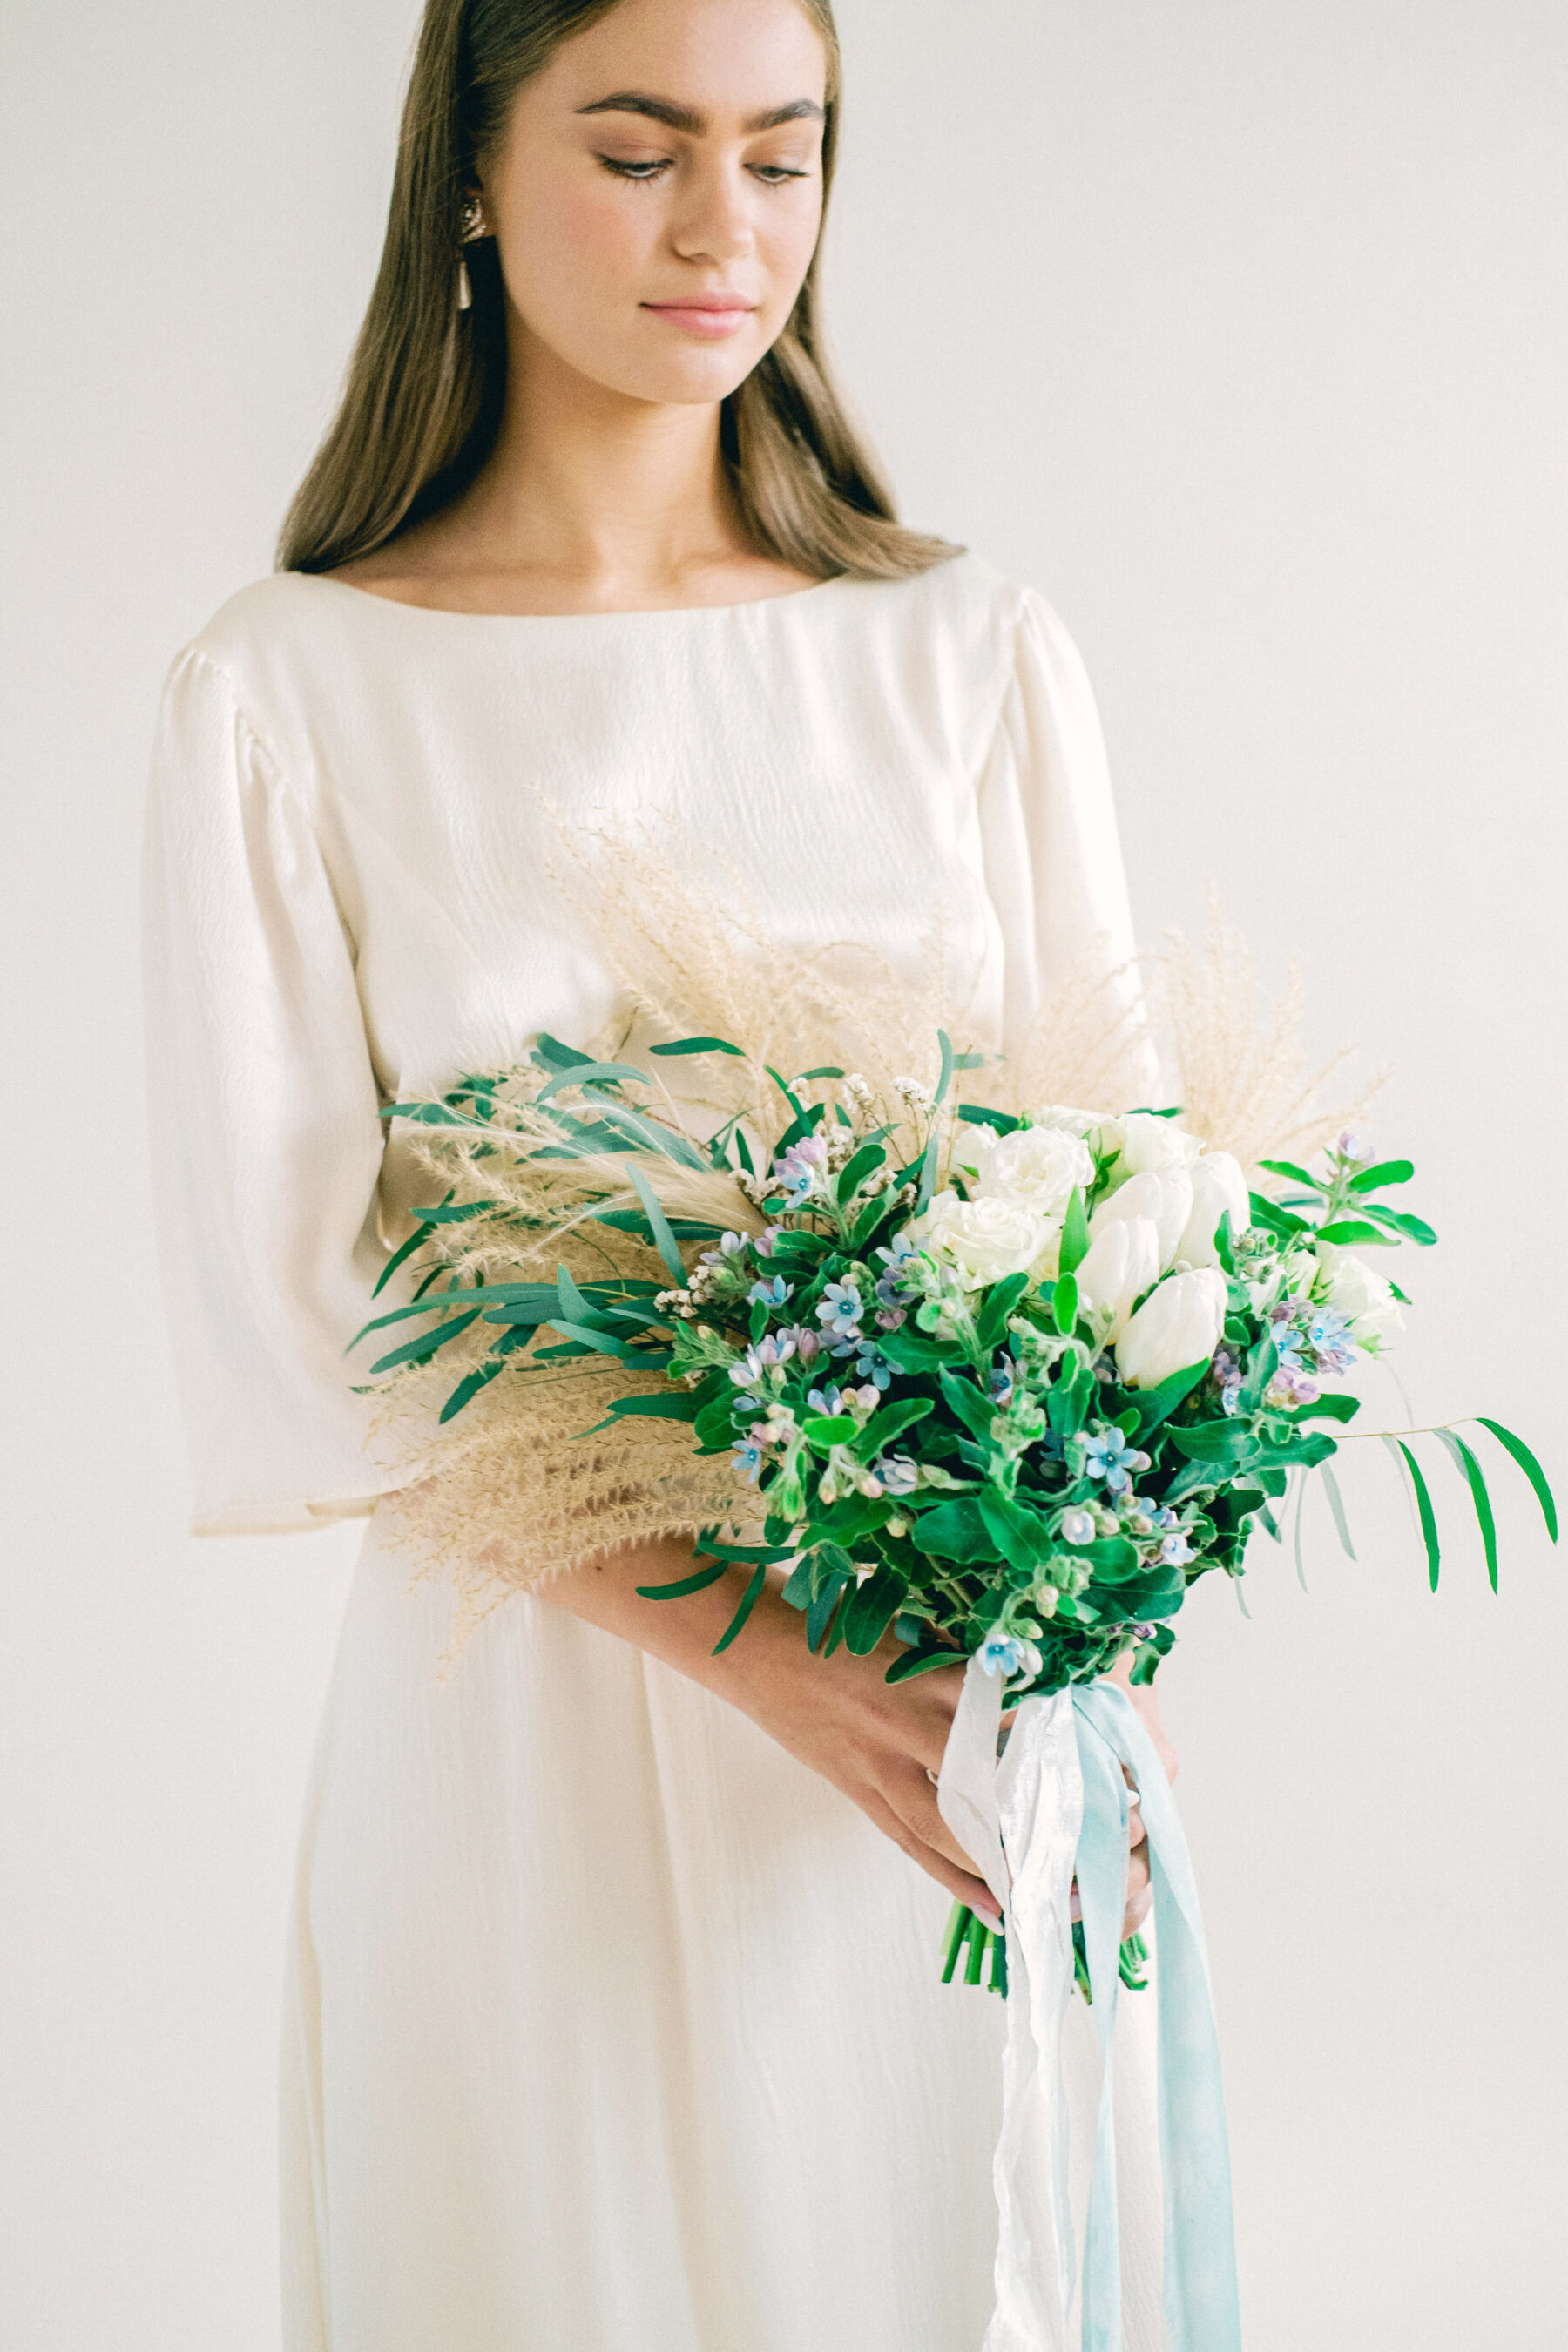 Bride wearing a Kate Beaumont wedding dress & carrying an elegant bouquet with greenery & blue flowers & long silk cream & blue ribbons.